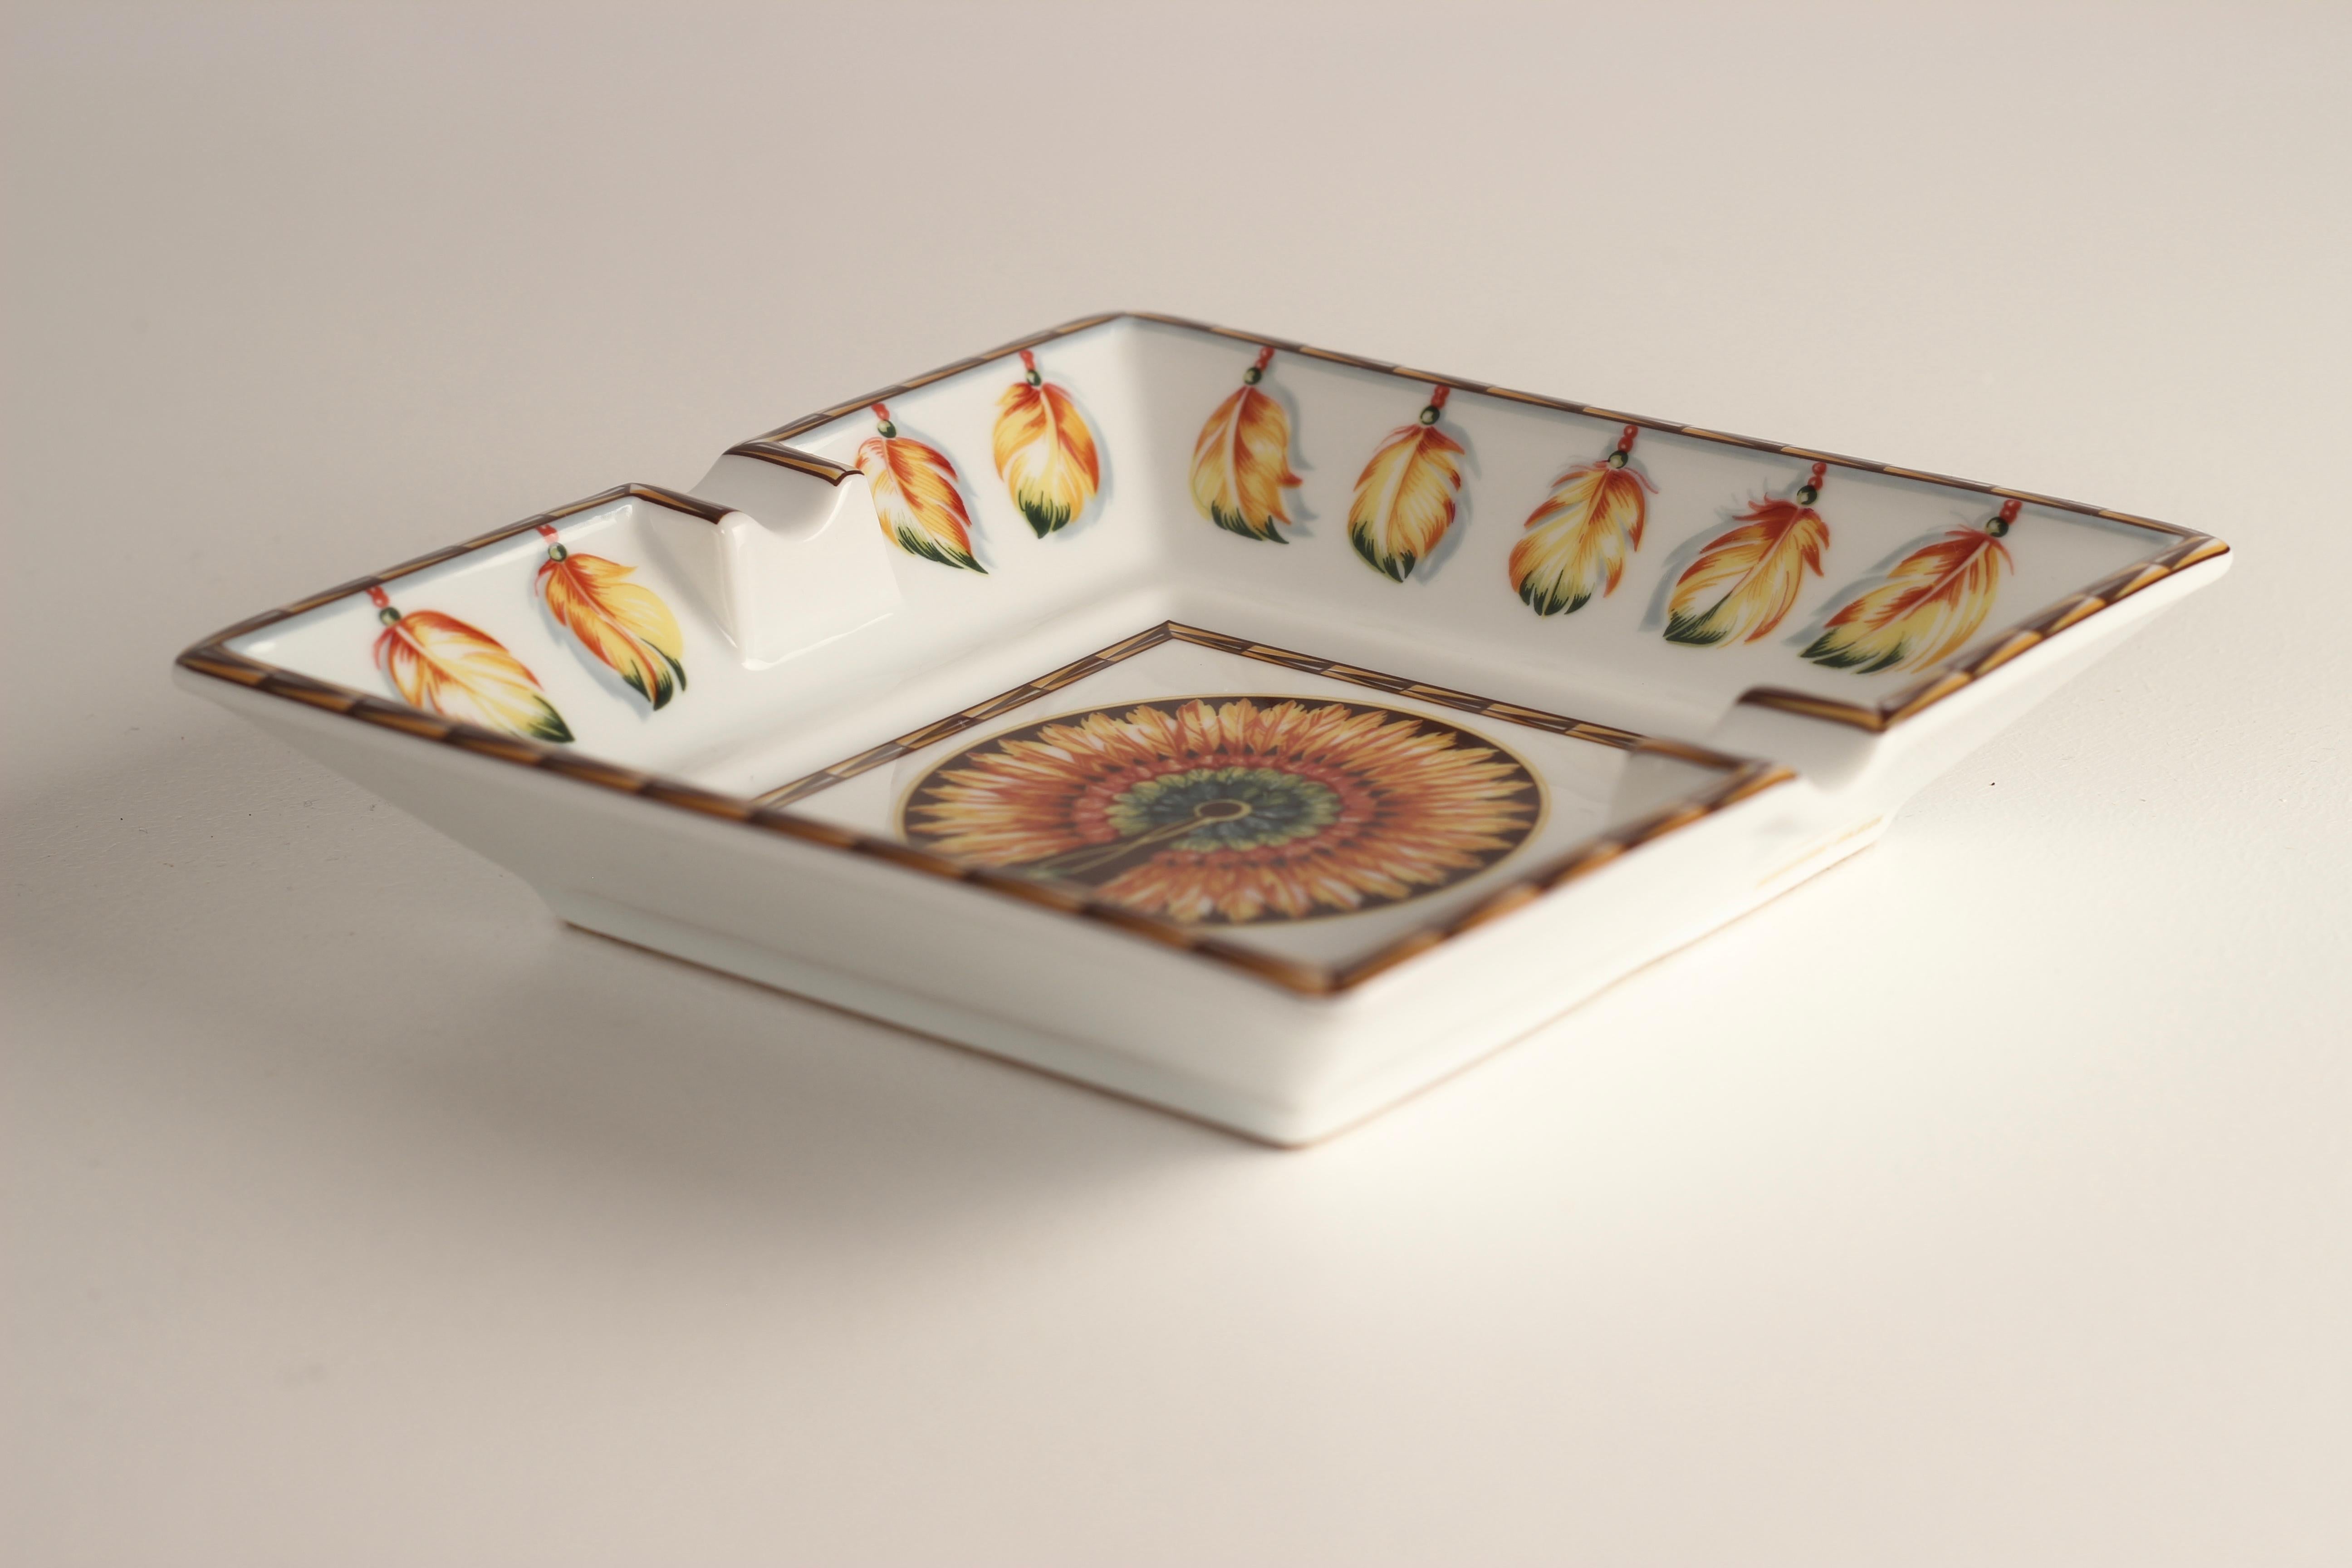 Hermès Porcelain Ashtray or Tray Vide-Poche Catchall Made in France 2